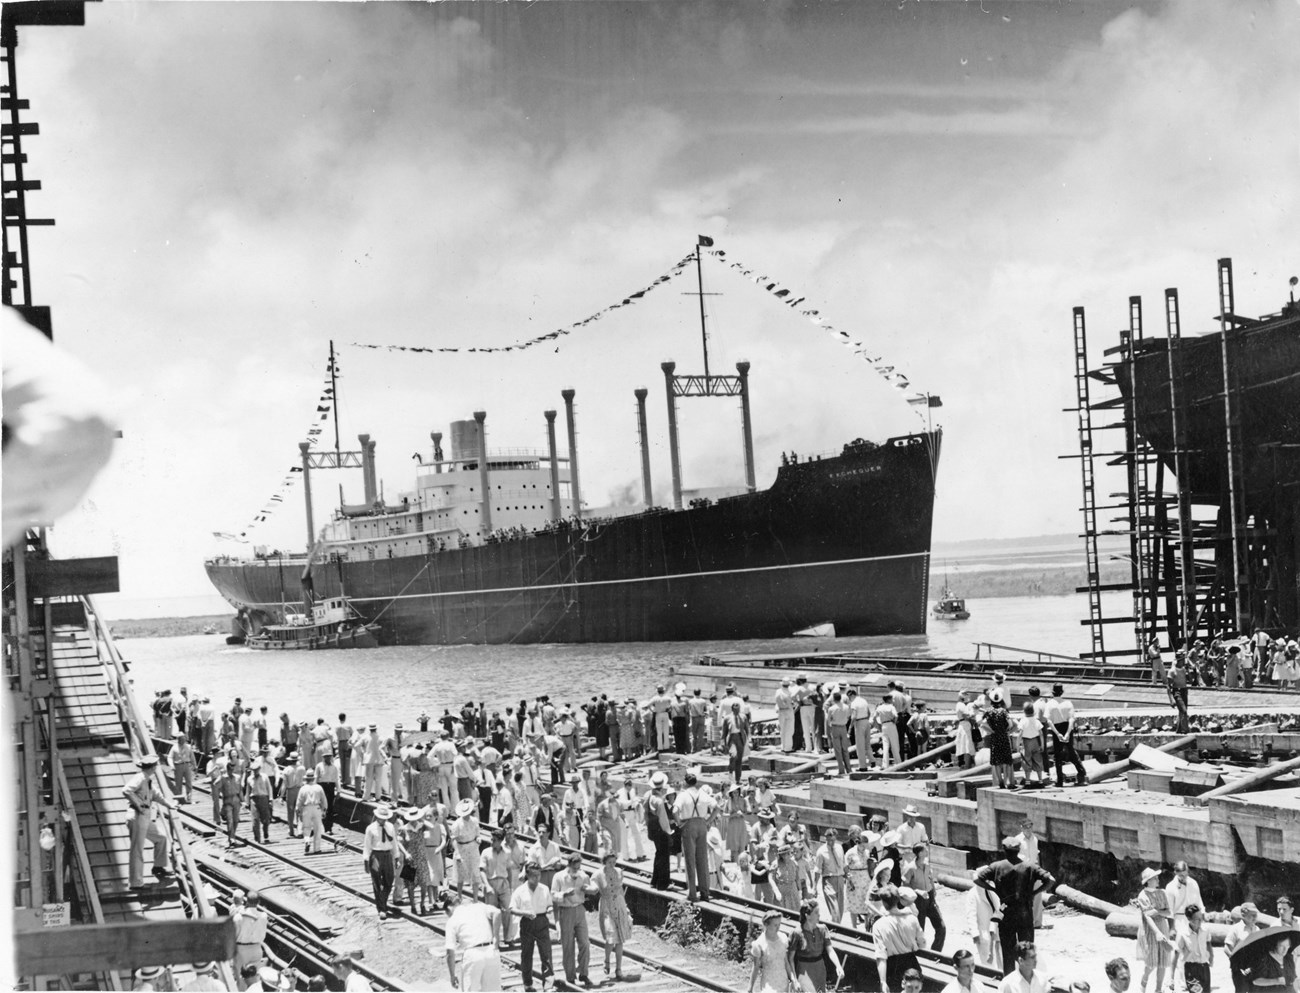 Black and white photo of a crowd gathered on a pier with a large ship festooned with flags just off the dock. Scaffolding on either side